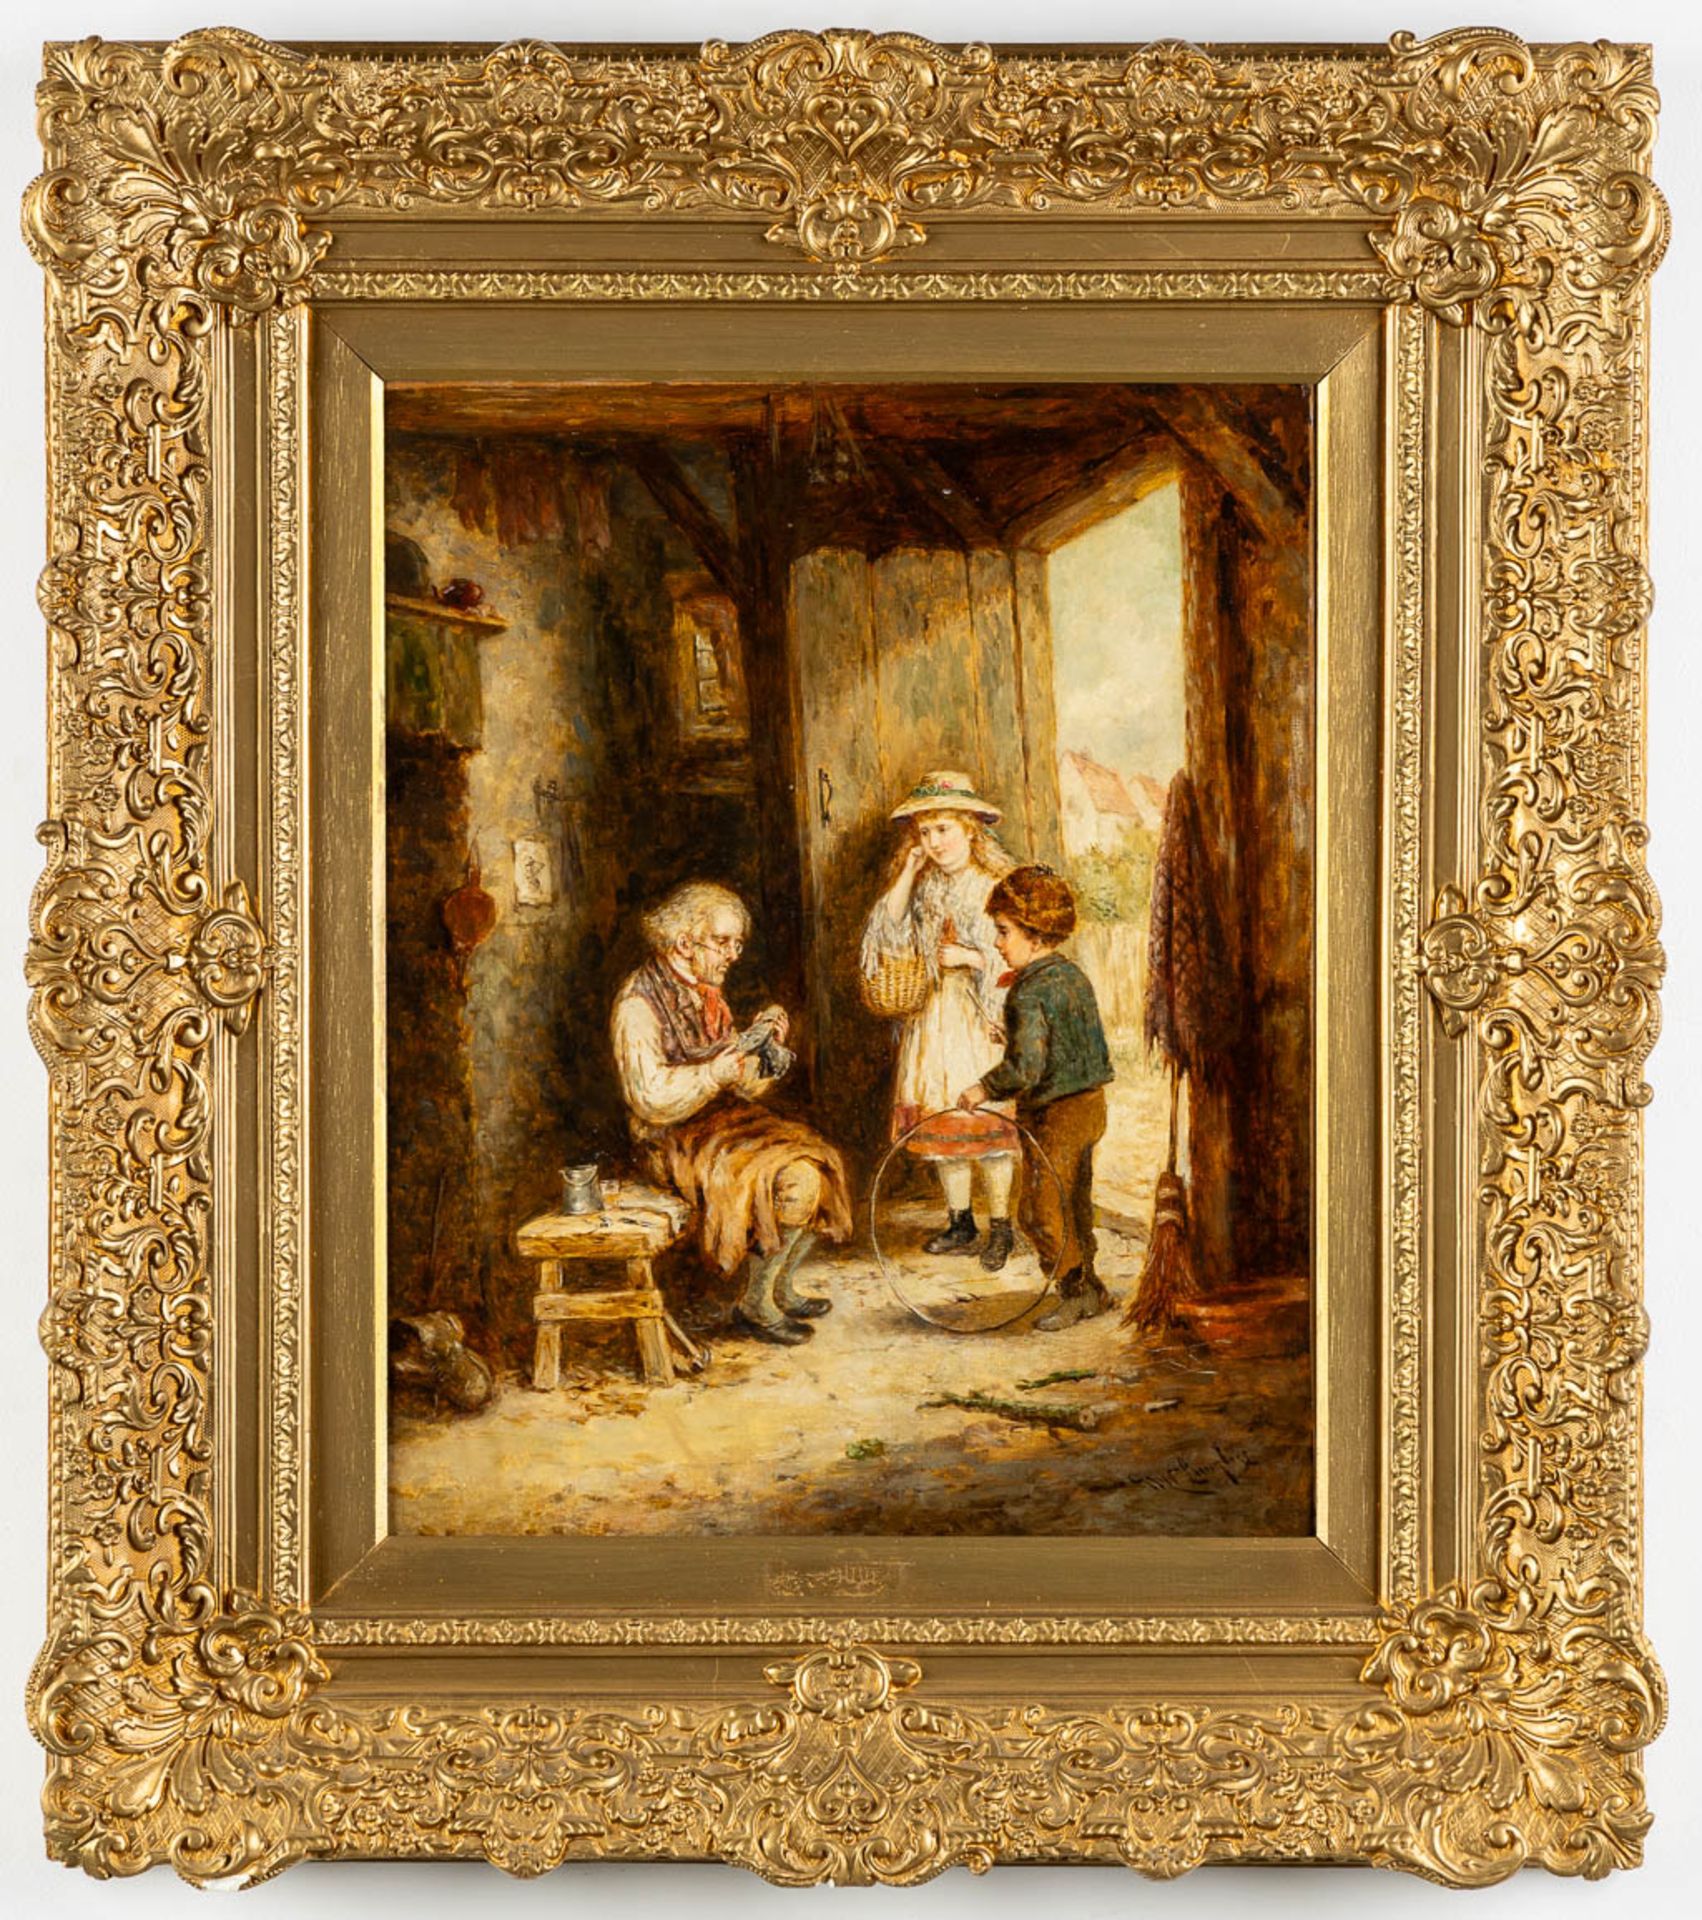 Mark William LANGLOIS (1848-1924) 'Children with a shoemaker' oil on canvas. (W:44 x H:54 cm) - Image 3 of 7